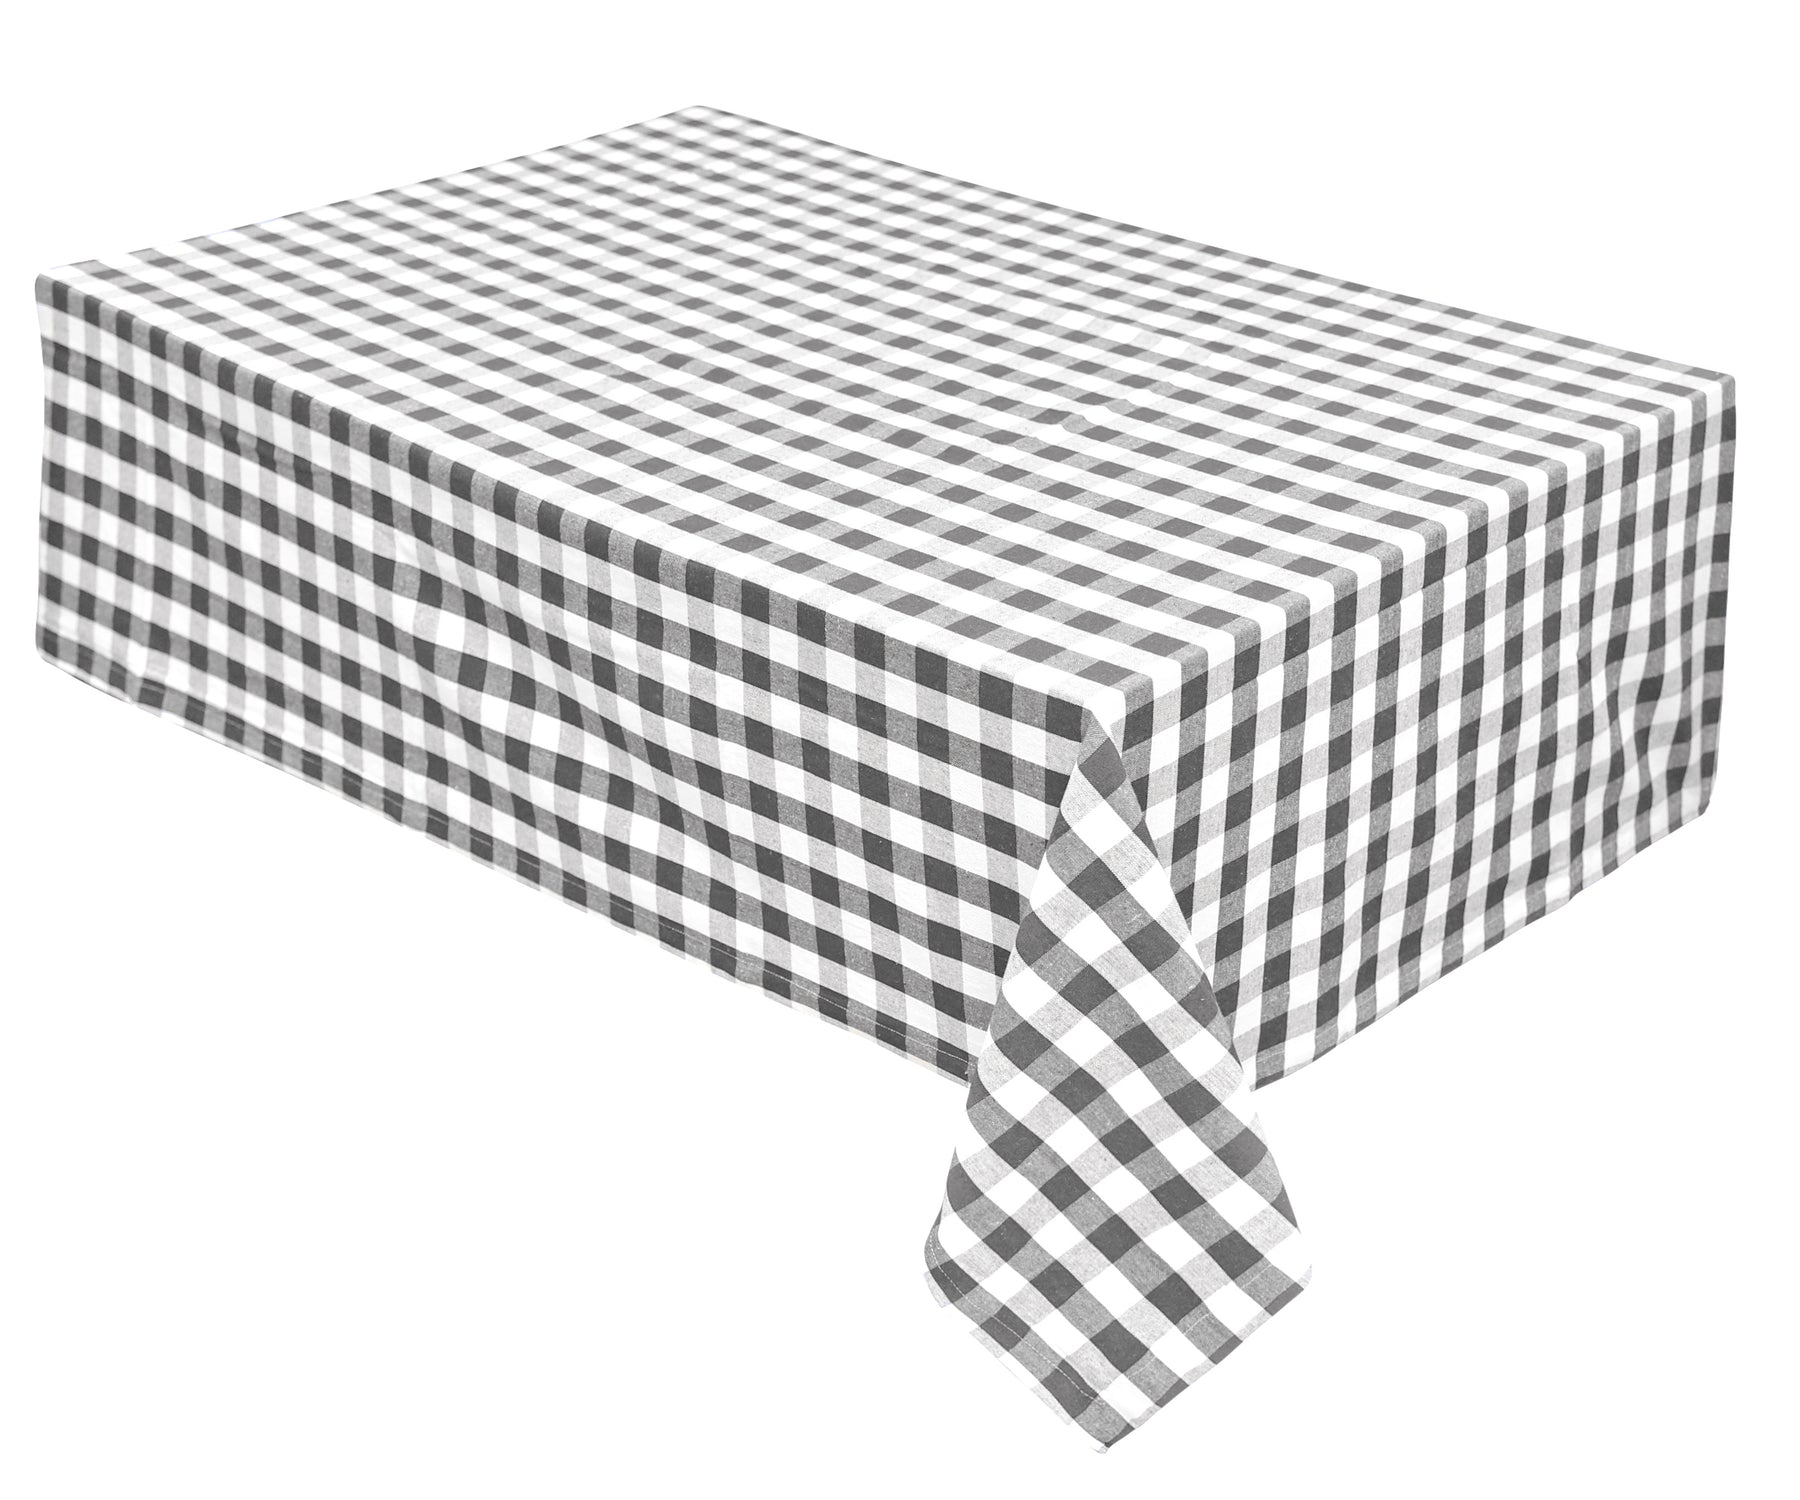 Cotton tablecloth perfect for casual dining or special events.